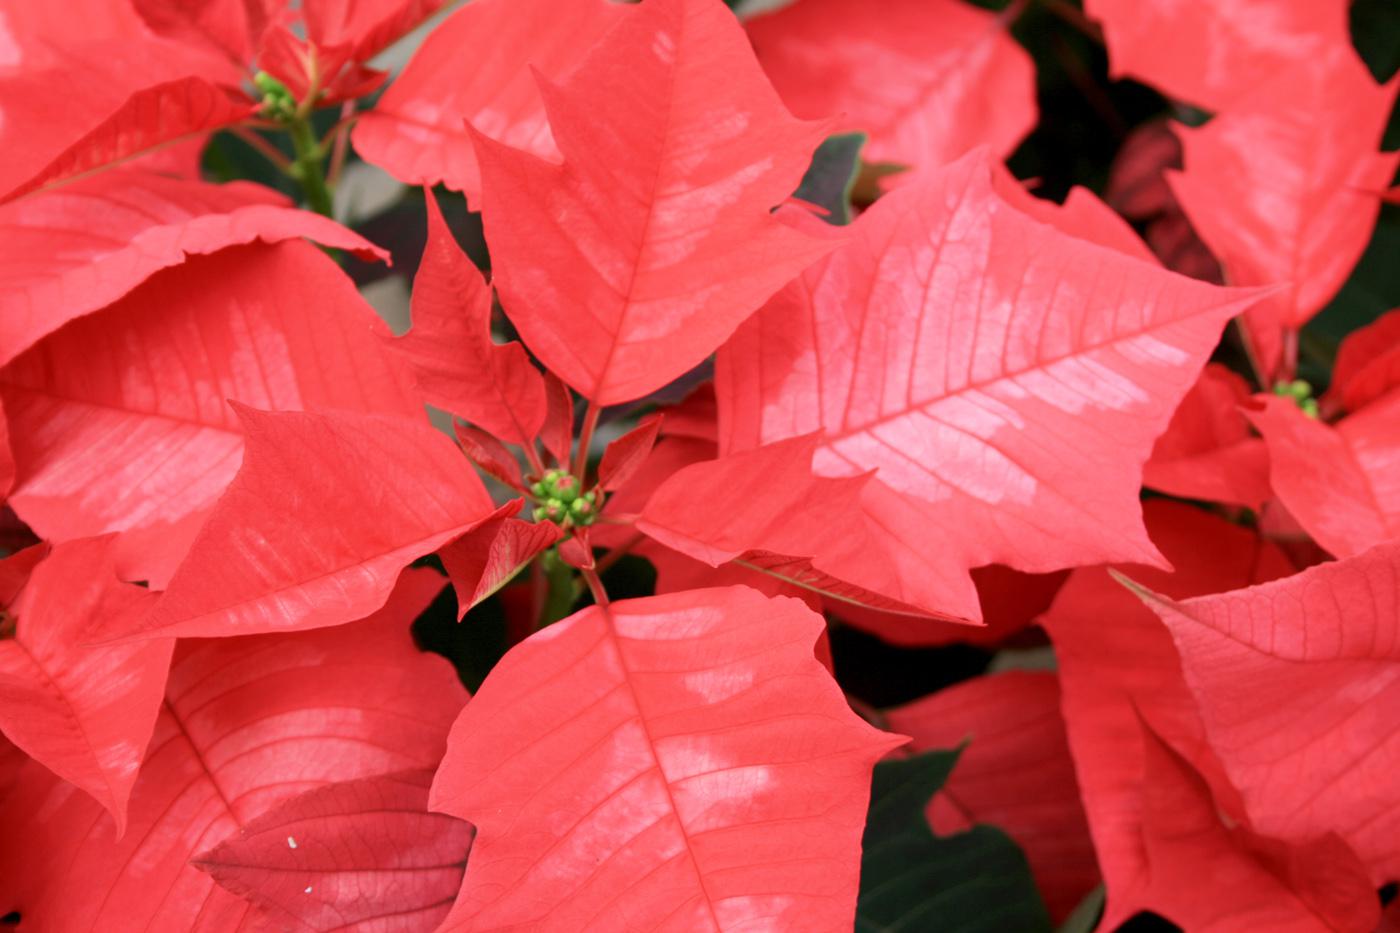 The bracts of healthy poinsettias will be completely colored and fully expanded, such as those on this Ice Punch red poinsettia. (Photo by Gary Bachman)